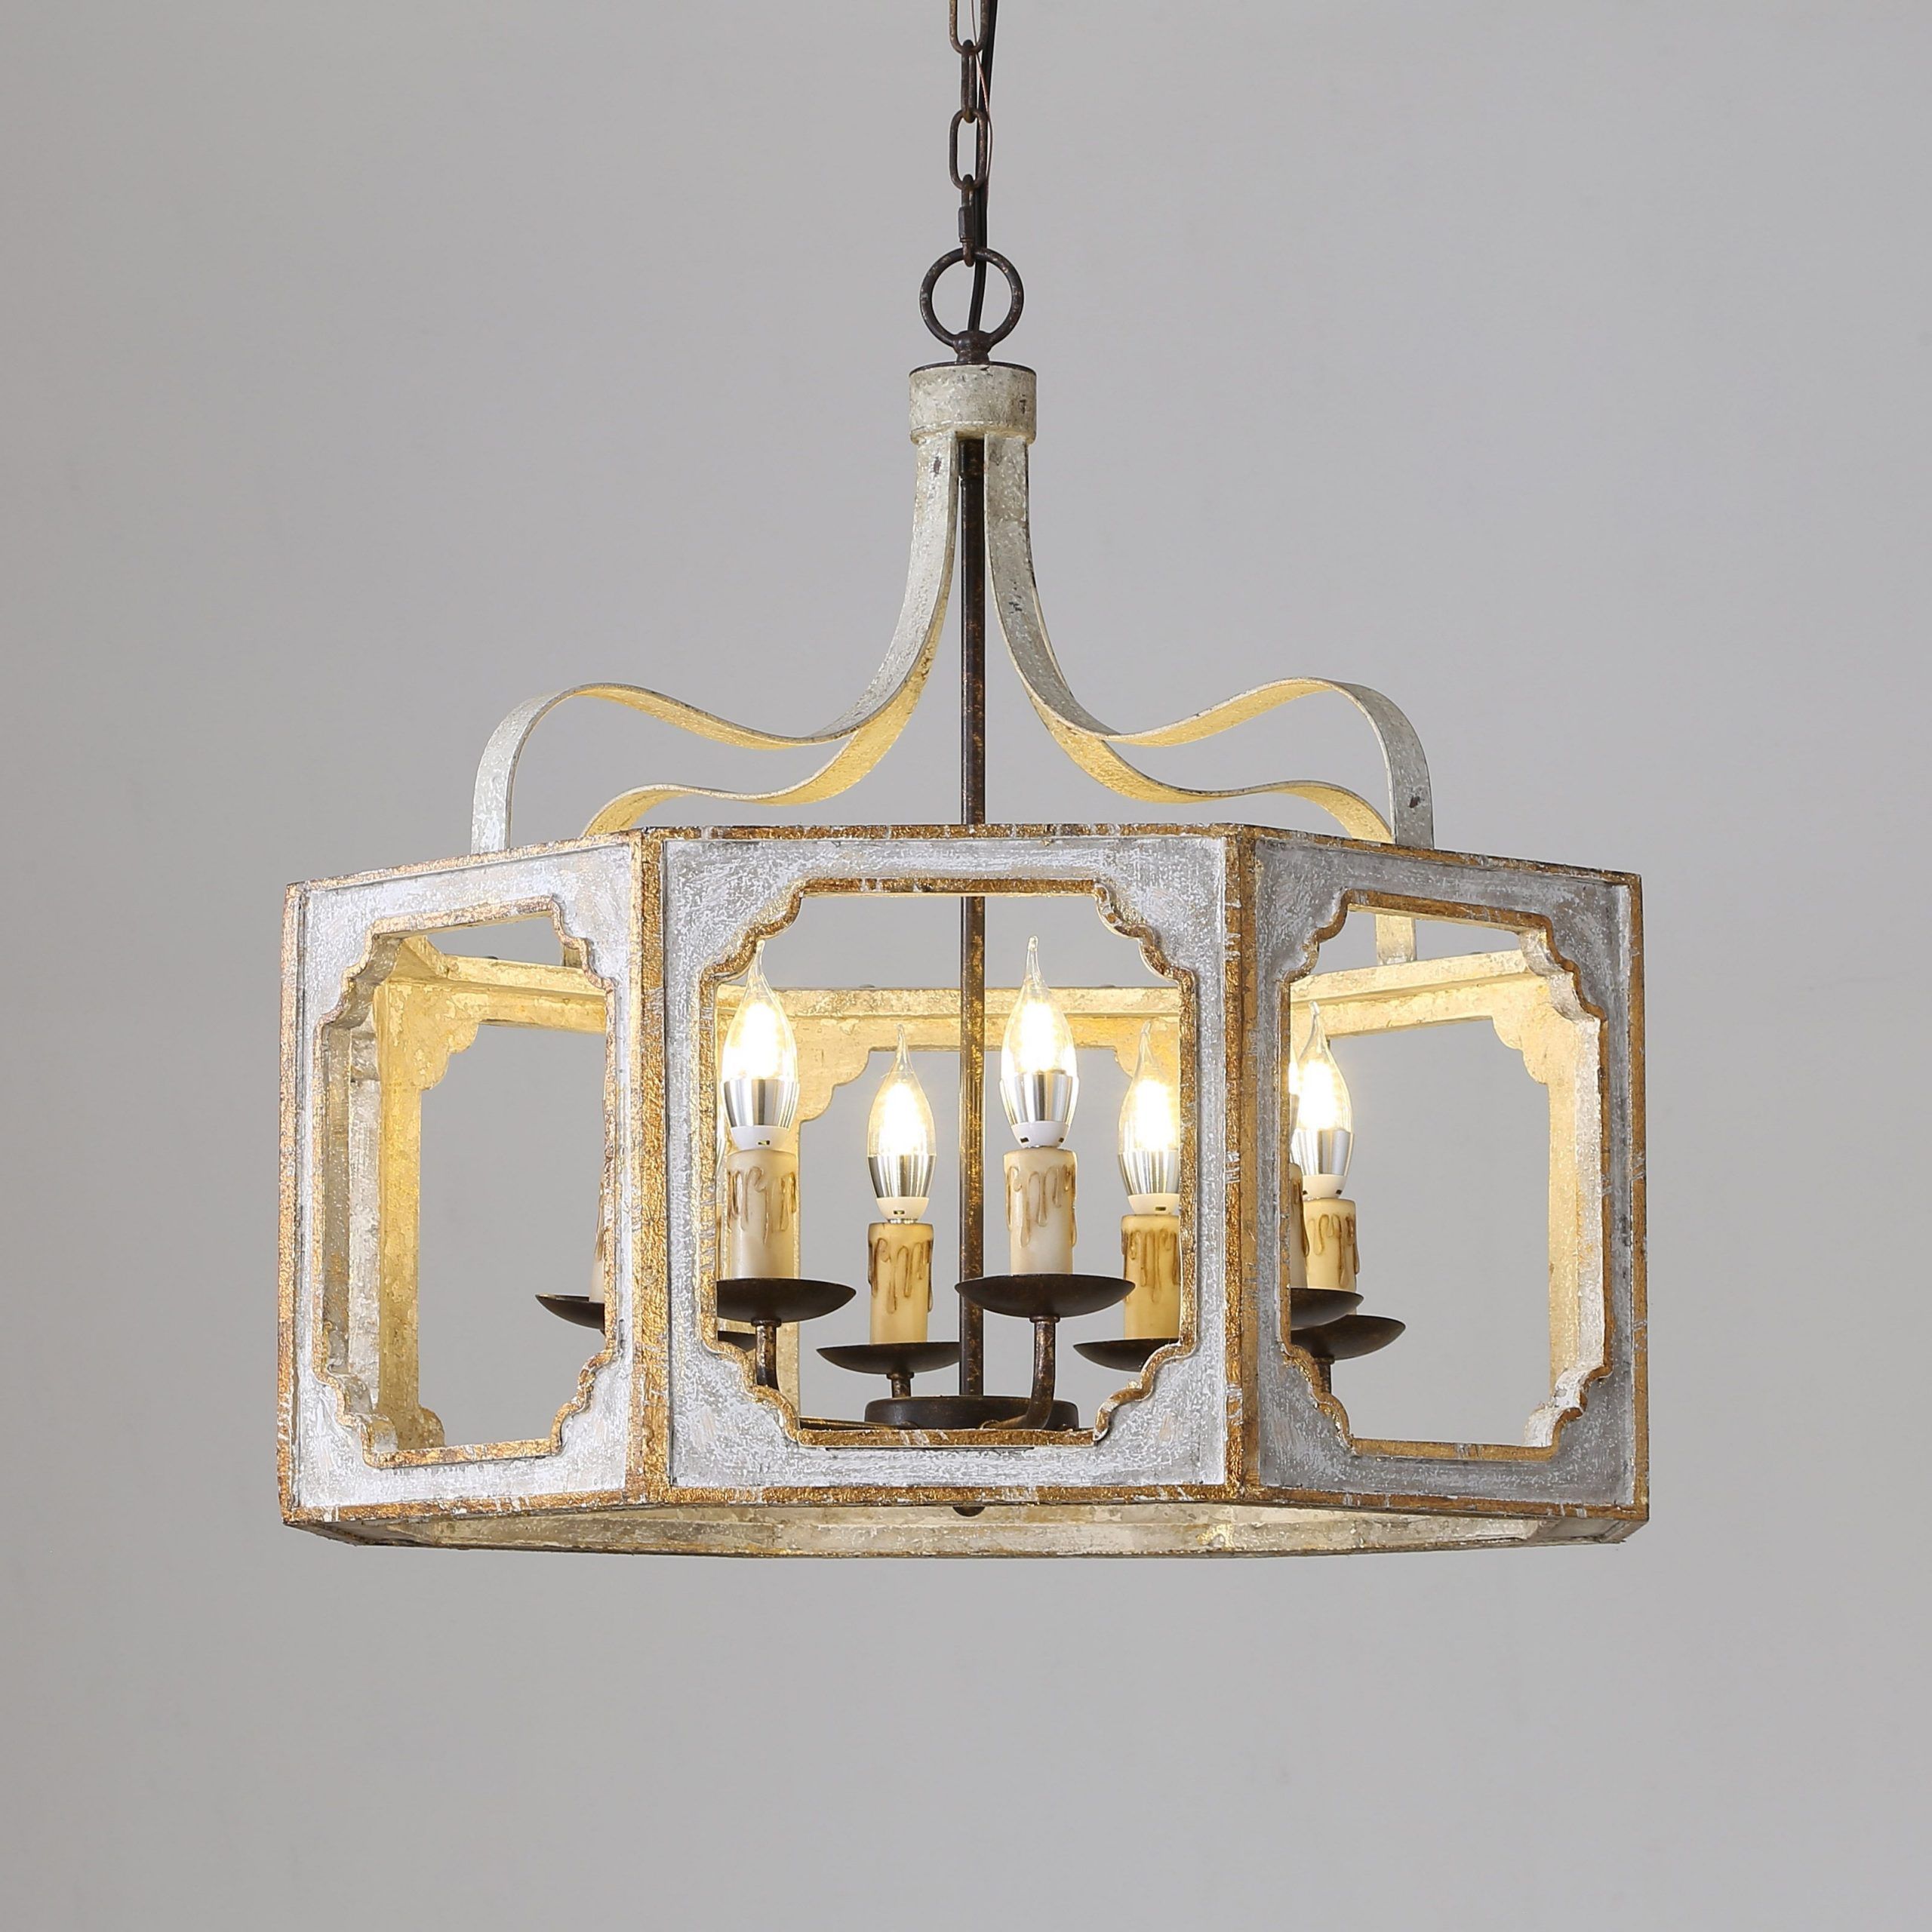 Lantern Chandelier, Country Chandelier, Wood And Metal Chandelier Within Gray Wash Lantern Chandeliers (View 1 of 10)